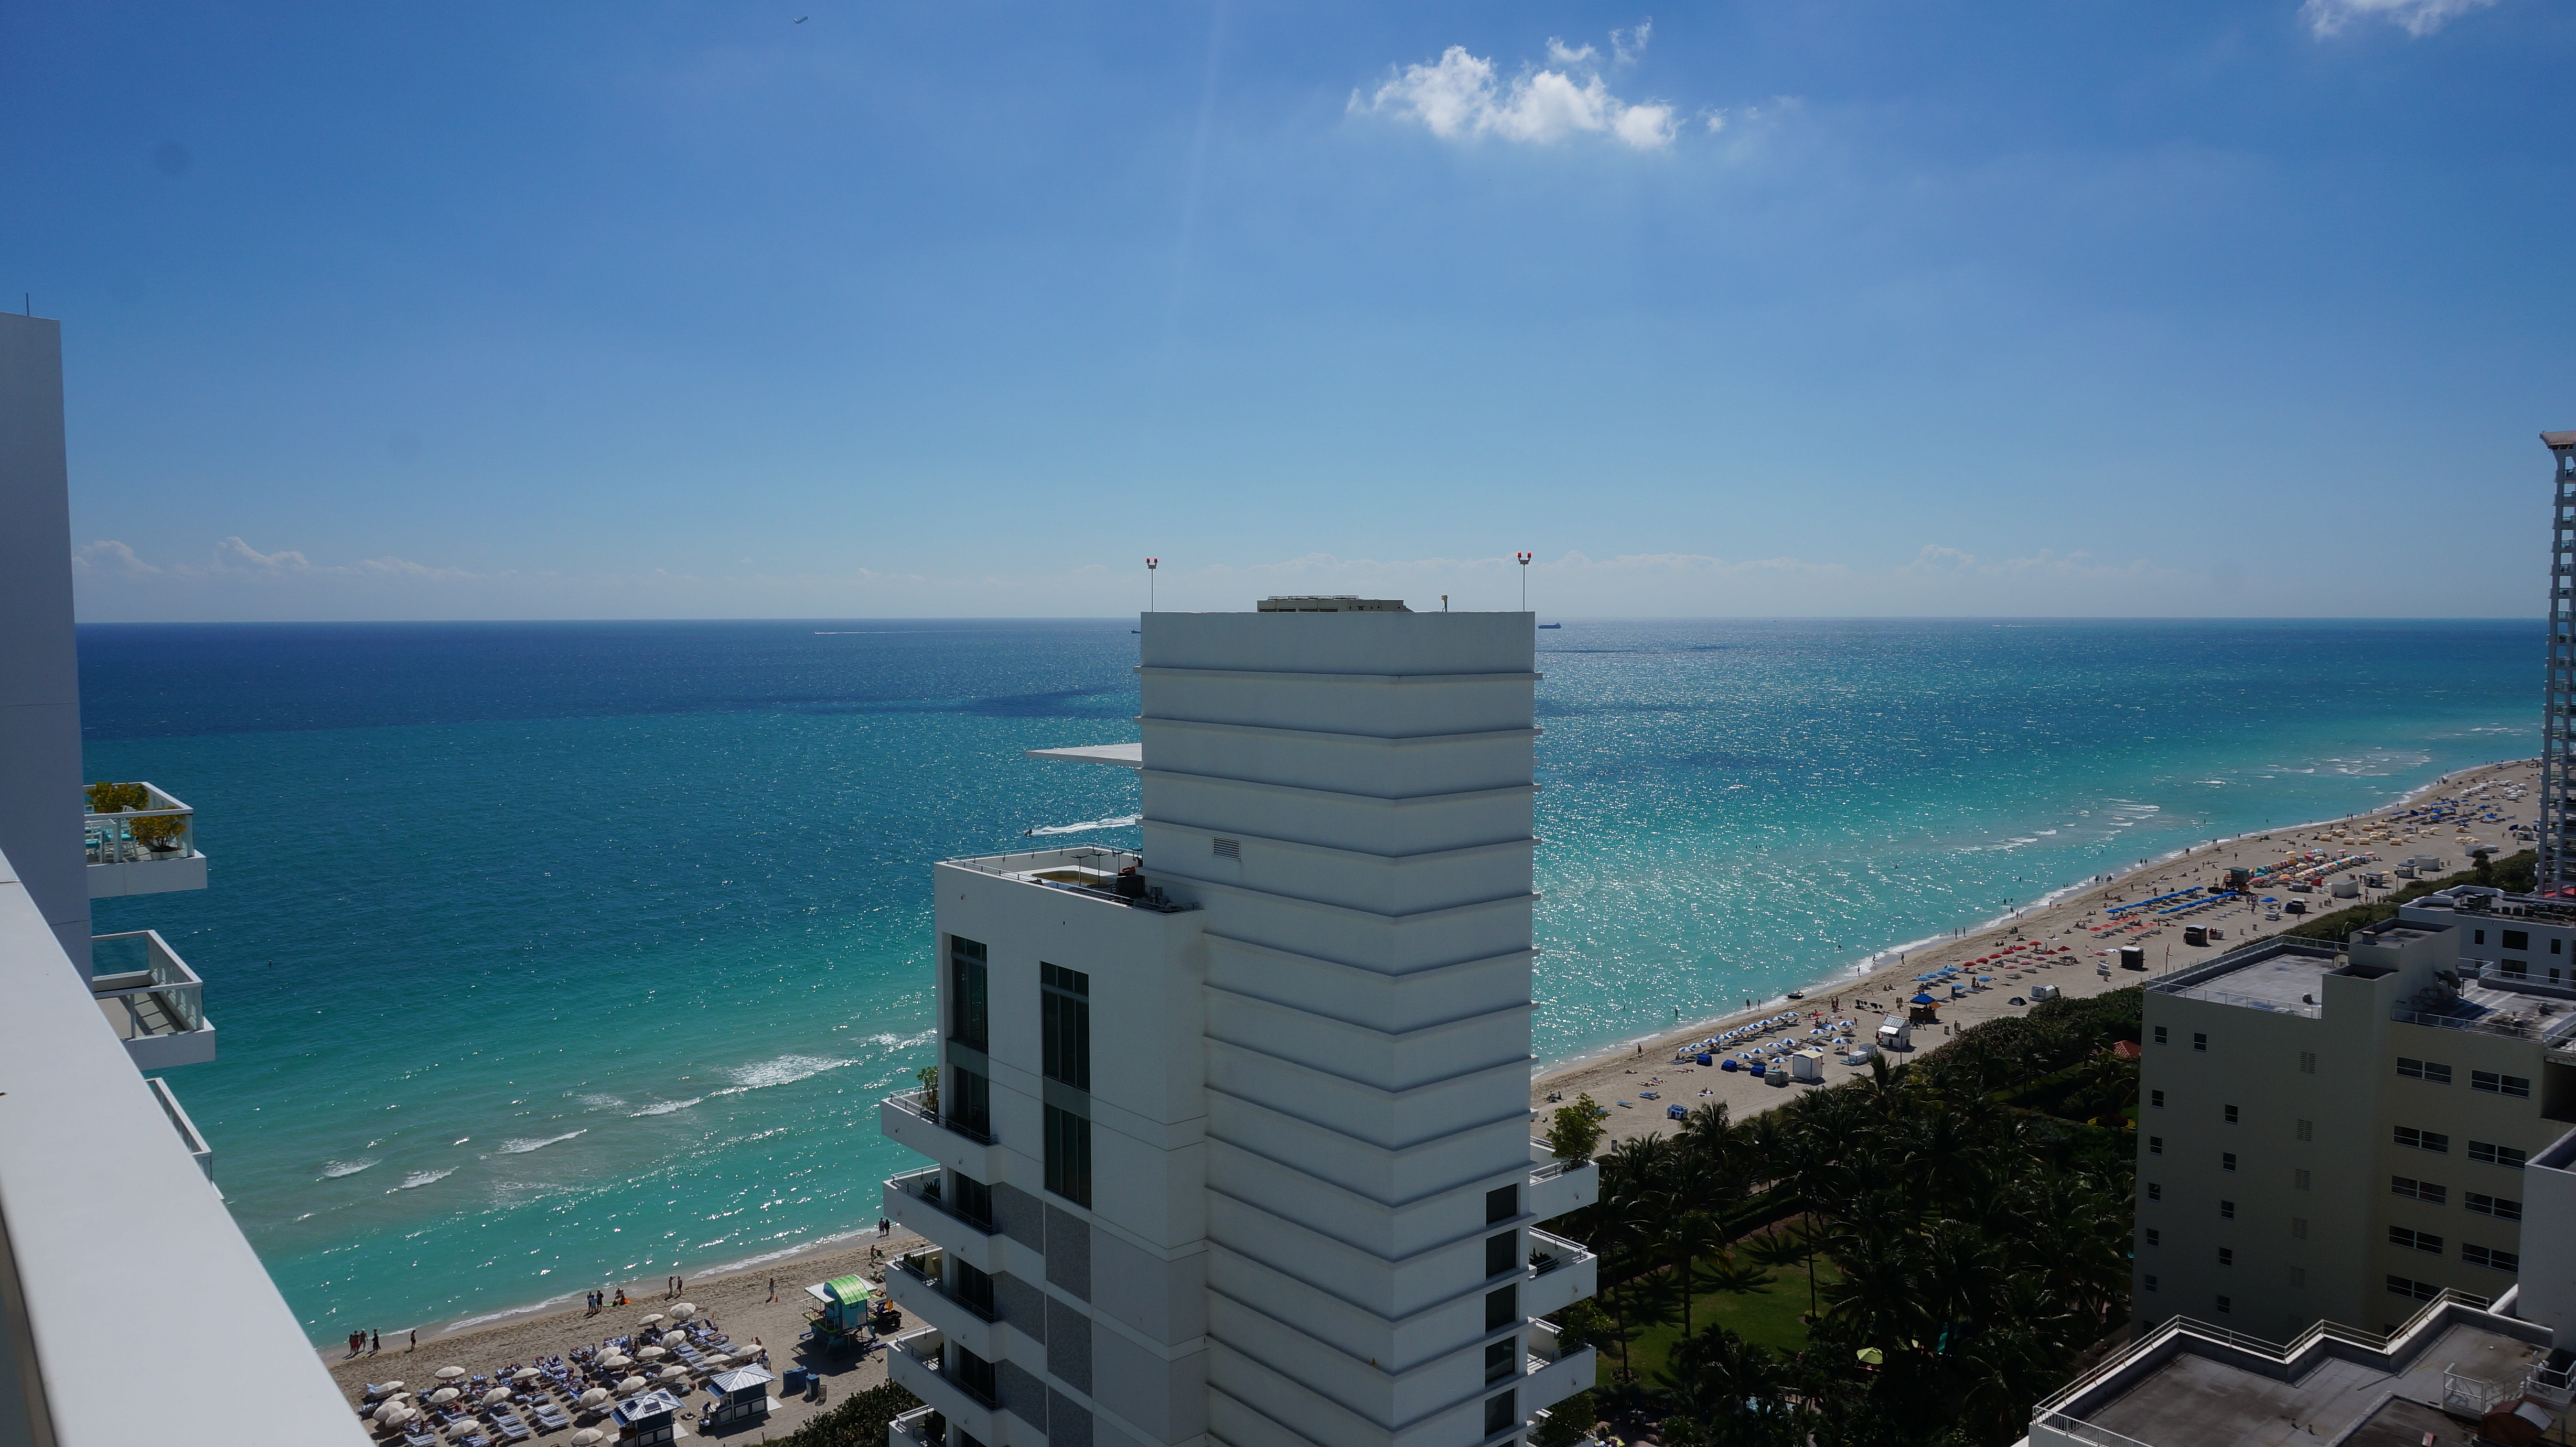 Party in the city where the heat is on at the Fontainebleau Miami Beach. 